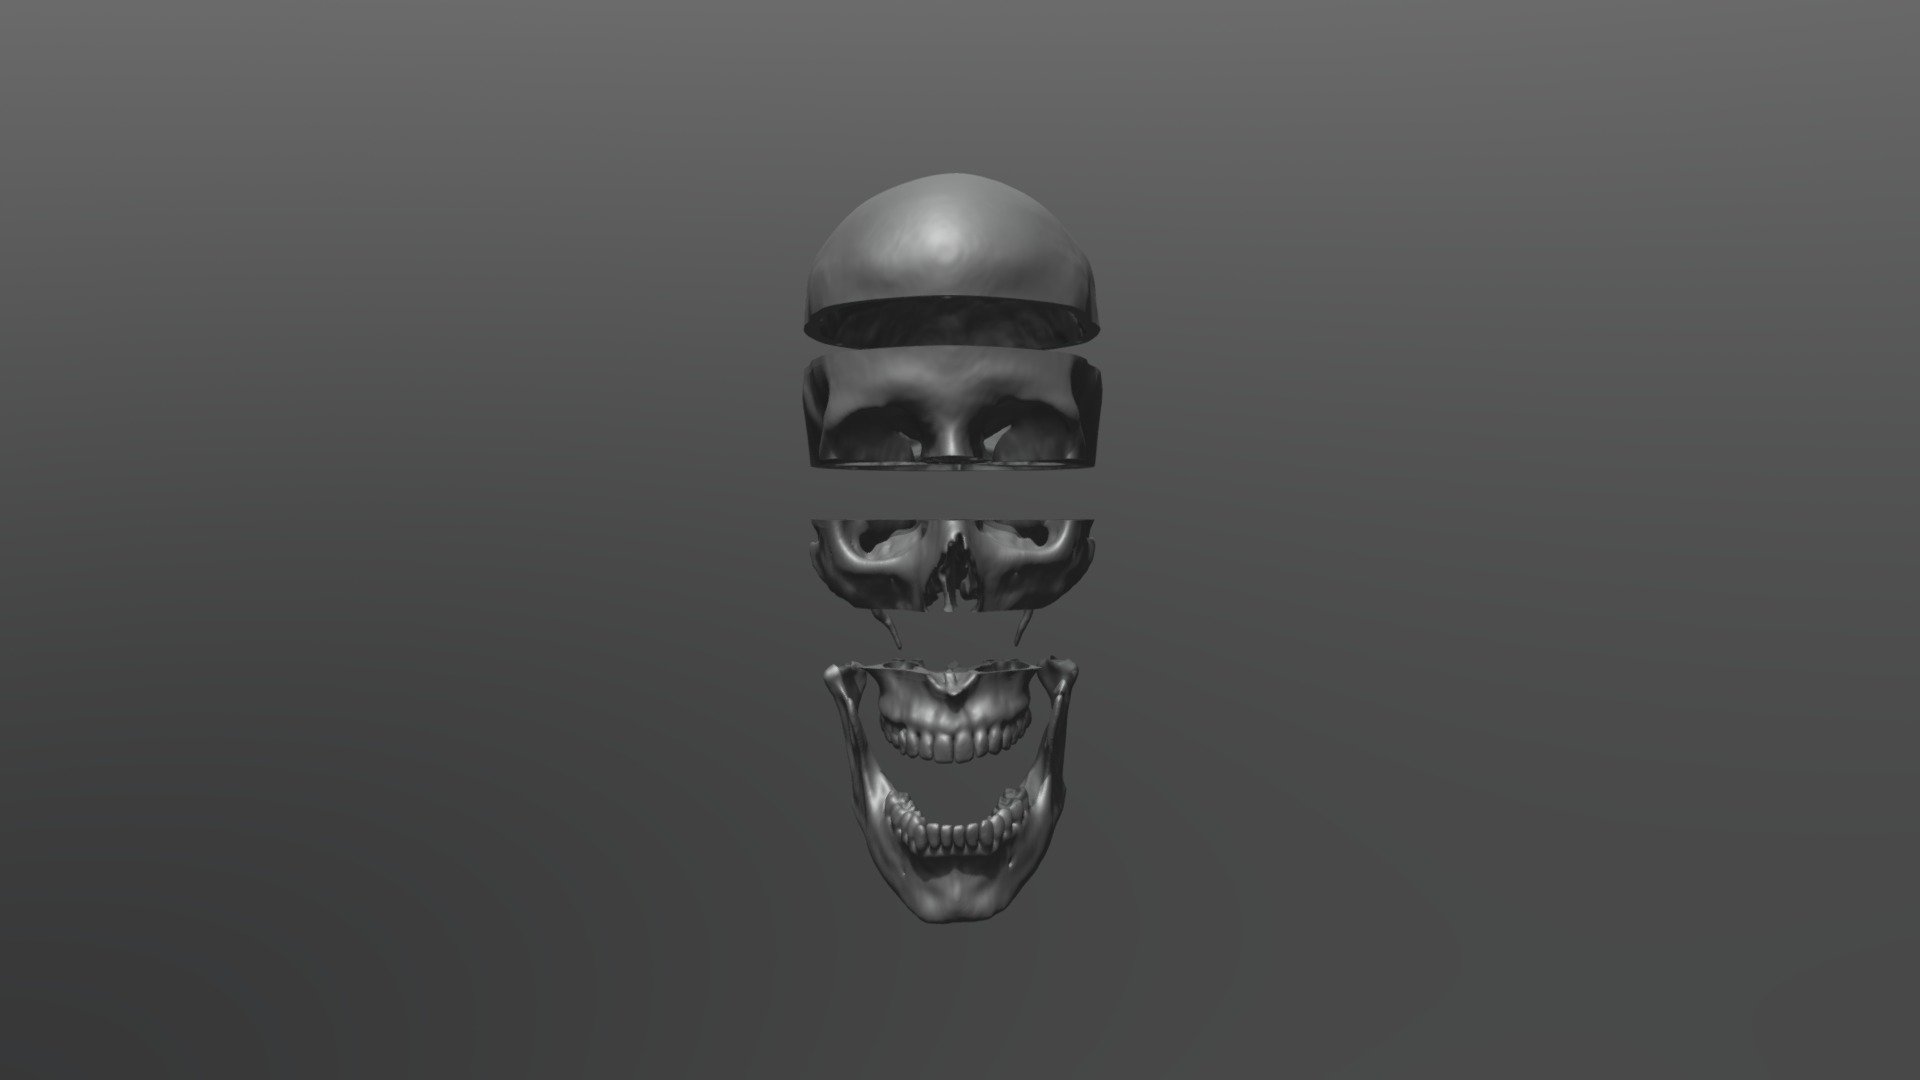 Skull HD, 5 parts, for 3D printing